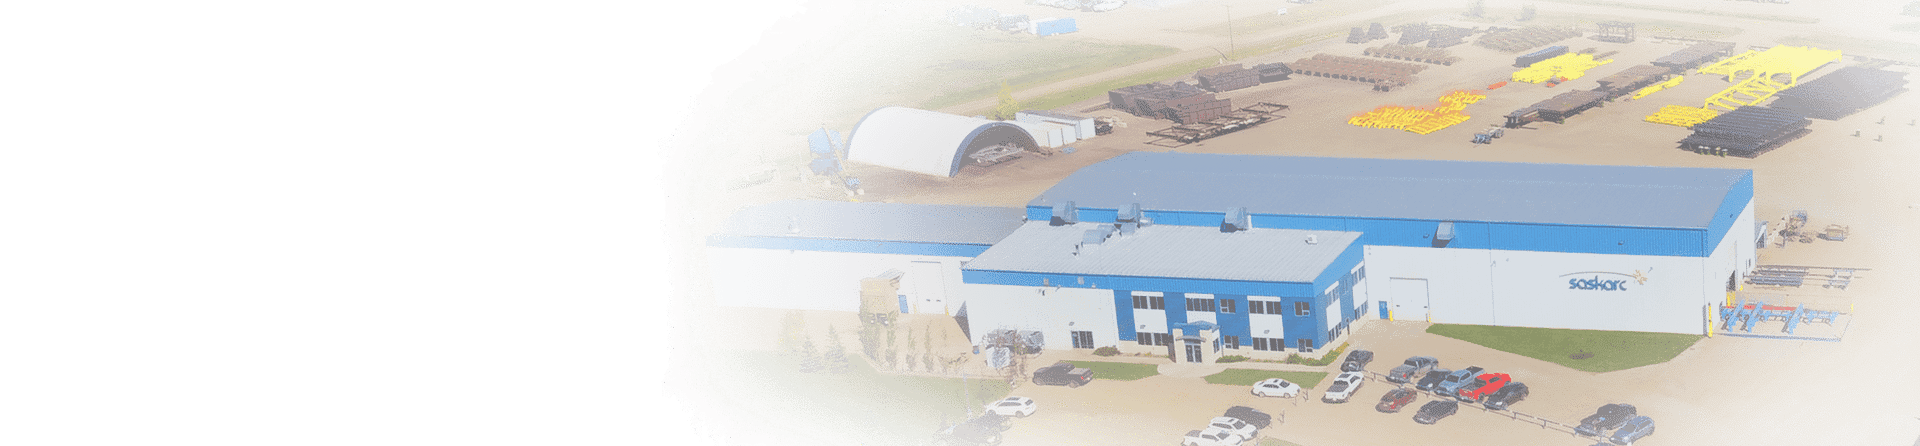 Saskarc compound in Oxbow, SK